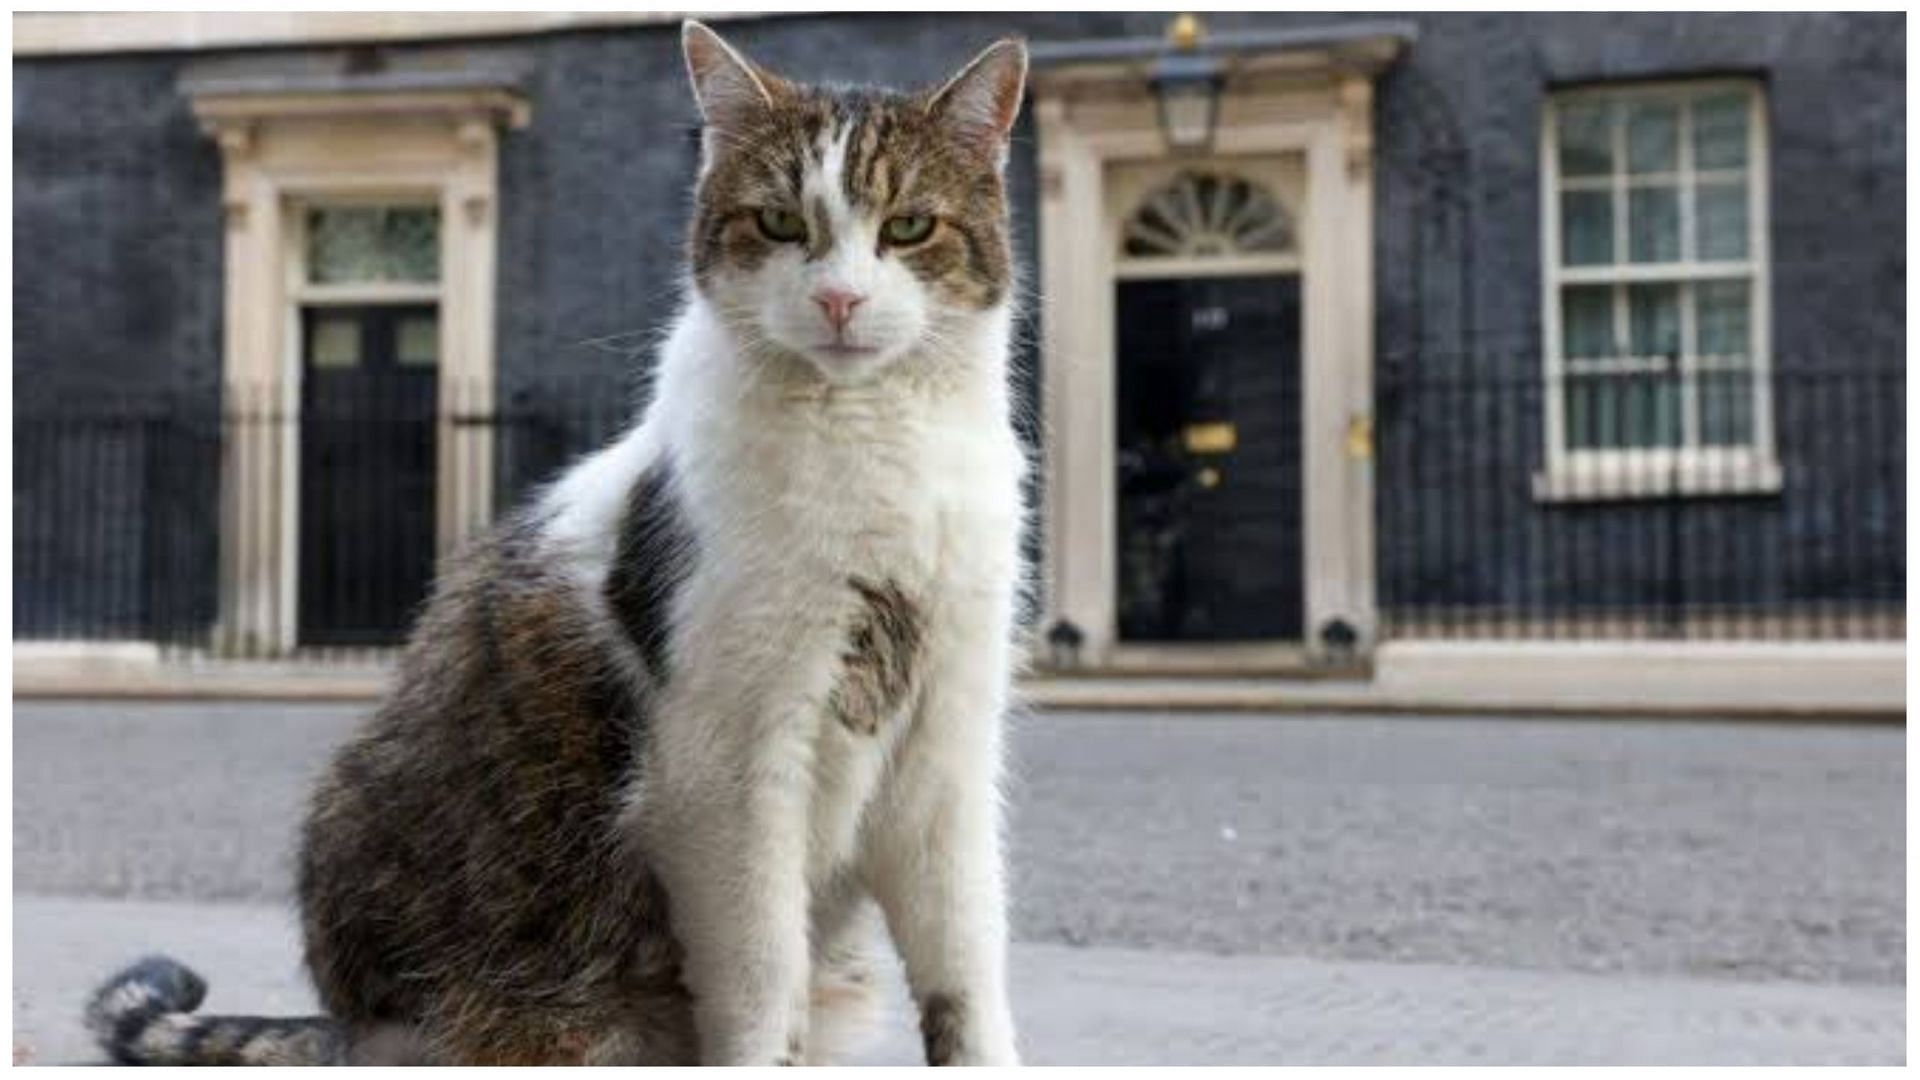 Larry the cat started trending after Boris Johnson mention him in his speech (Image via @mutwirimutuota/Twitter)